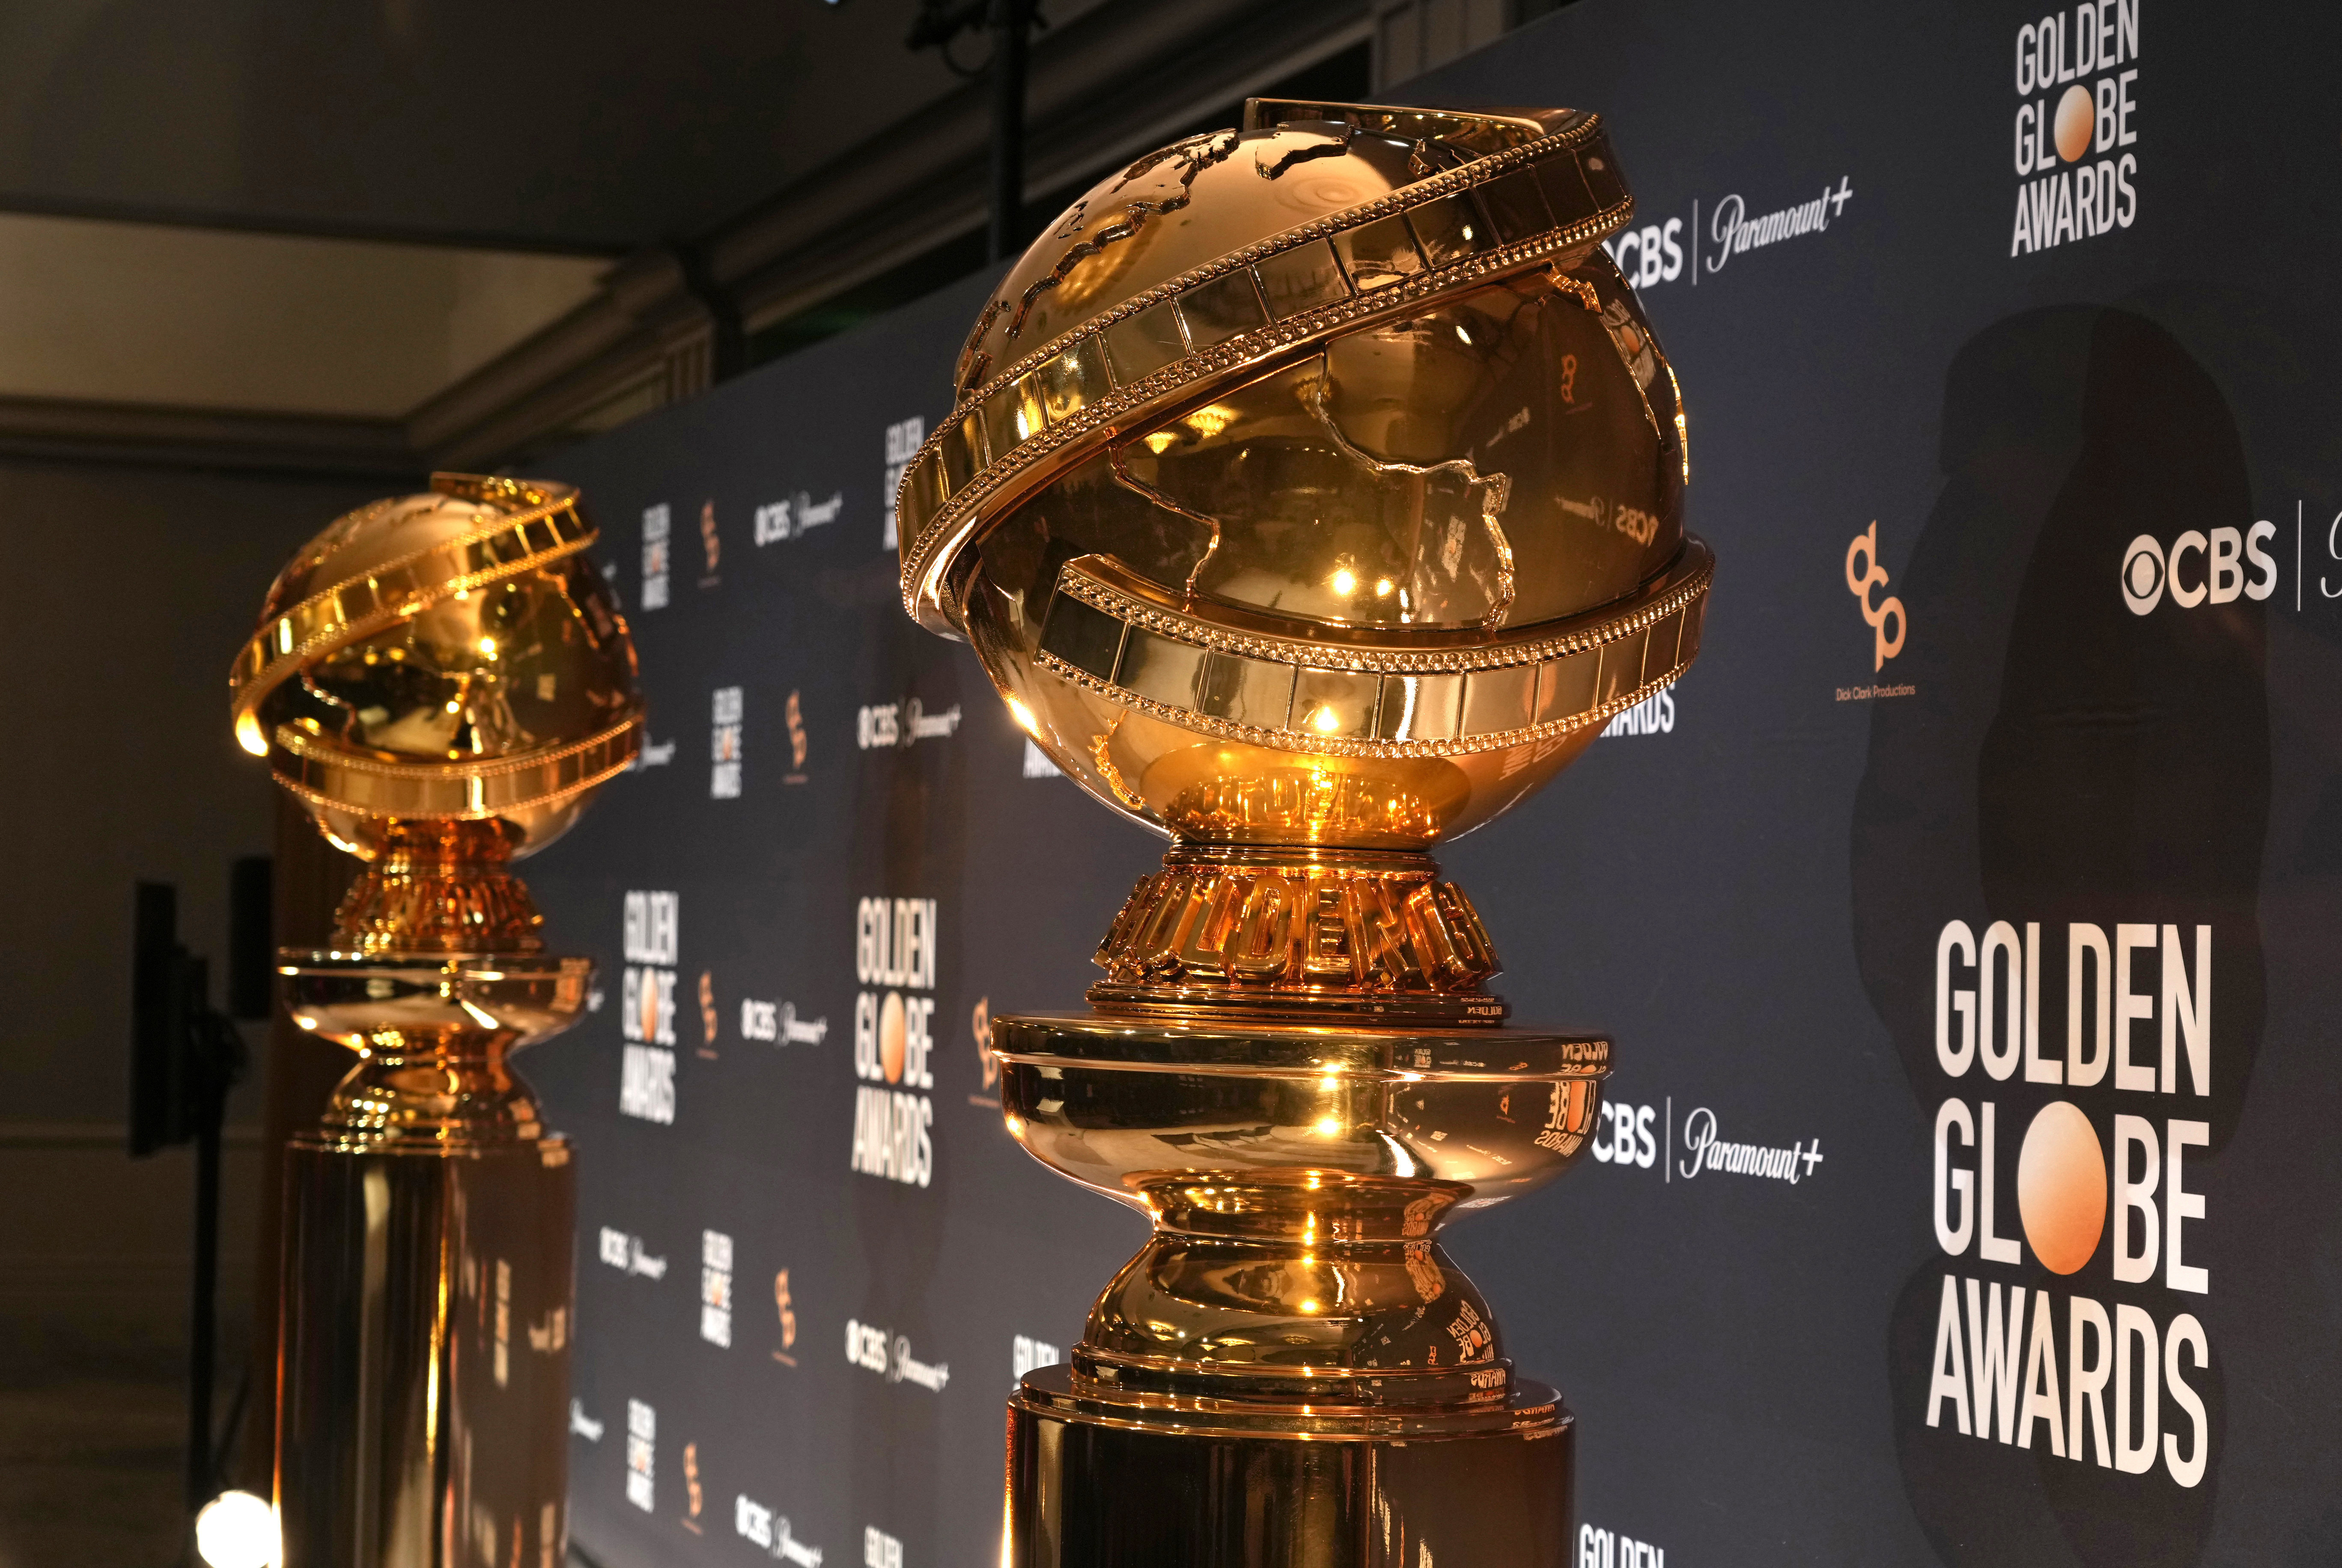 FILE - Replicas of Golden Globe statues appear at the nominations for the 81st Golden Globe Awards at the Beverly Hilton Hotel on Monday, Dec. 11, 2023, in Beverly Hills, Calif. The 81st Golden Globe Awards will be held on Sunday, Jan. 7, 2024. (AP Photo/Chris Pizzello, File)